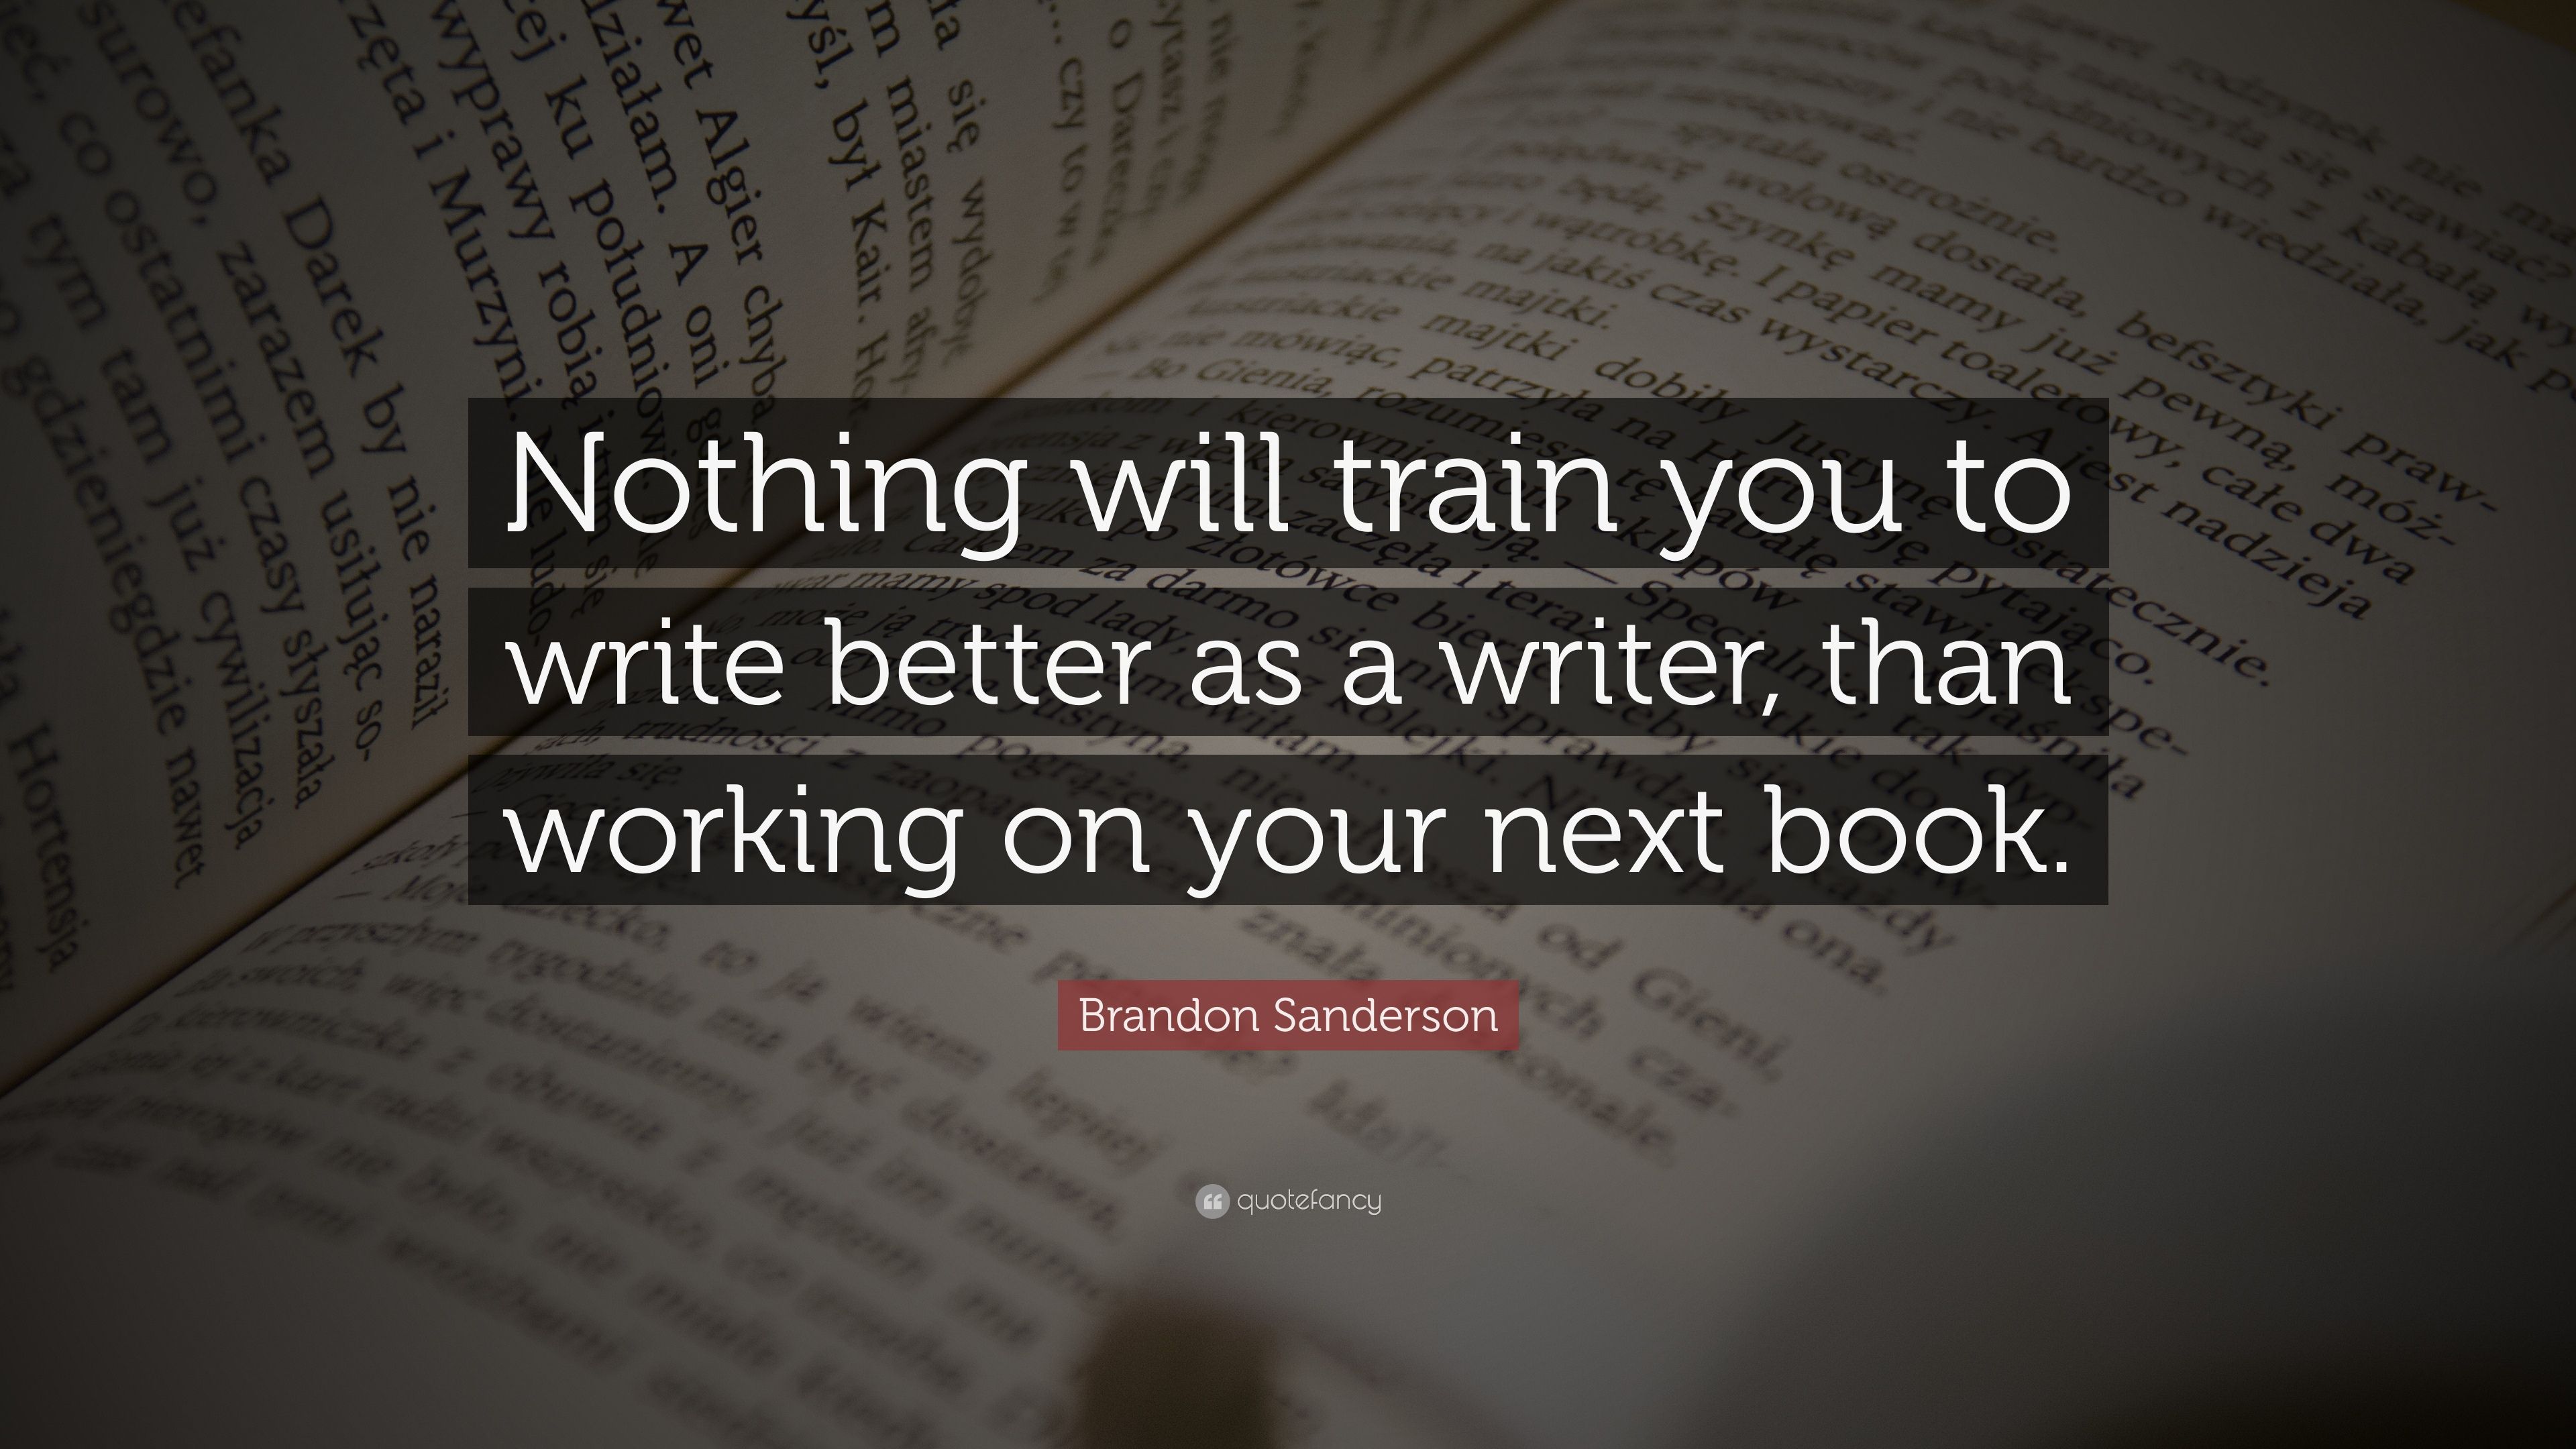 Brandon Sanderson Quote: “Nothing will train you to write better as a writer, than working on your next book.” (9 wallpaper)